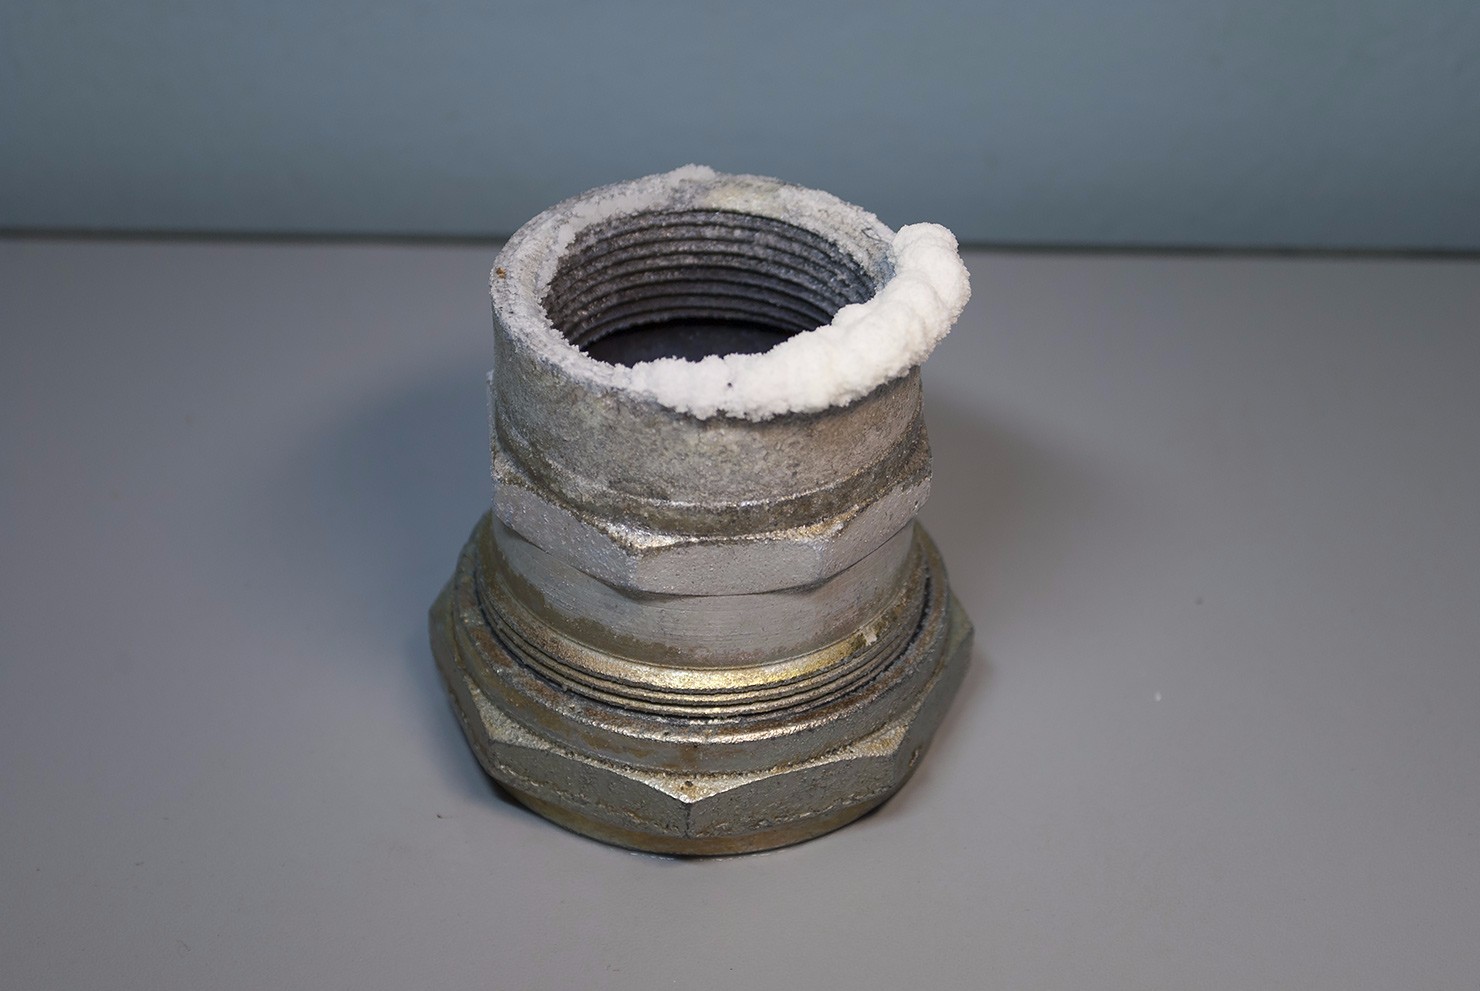 Salt test of the coupling clamp